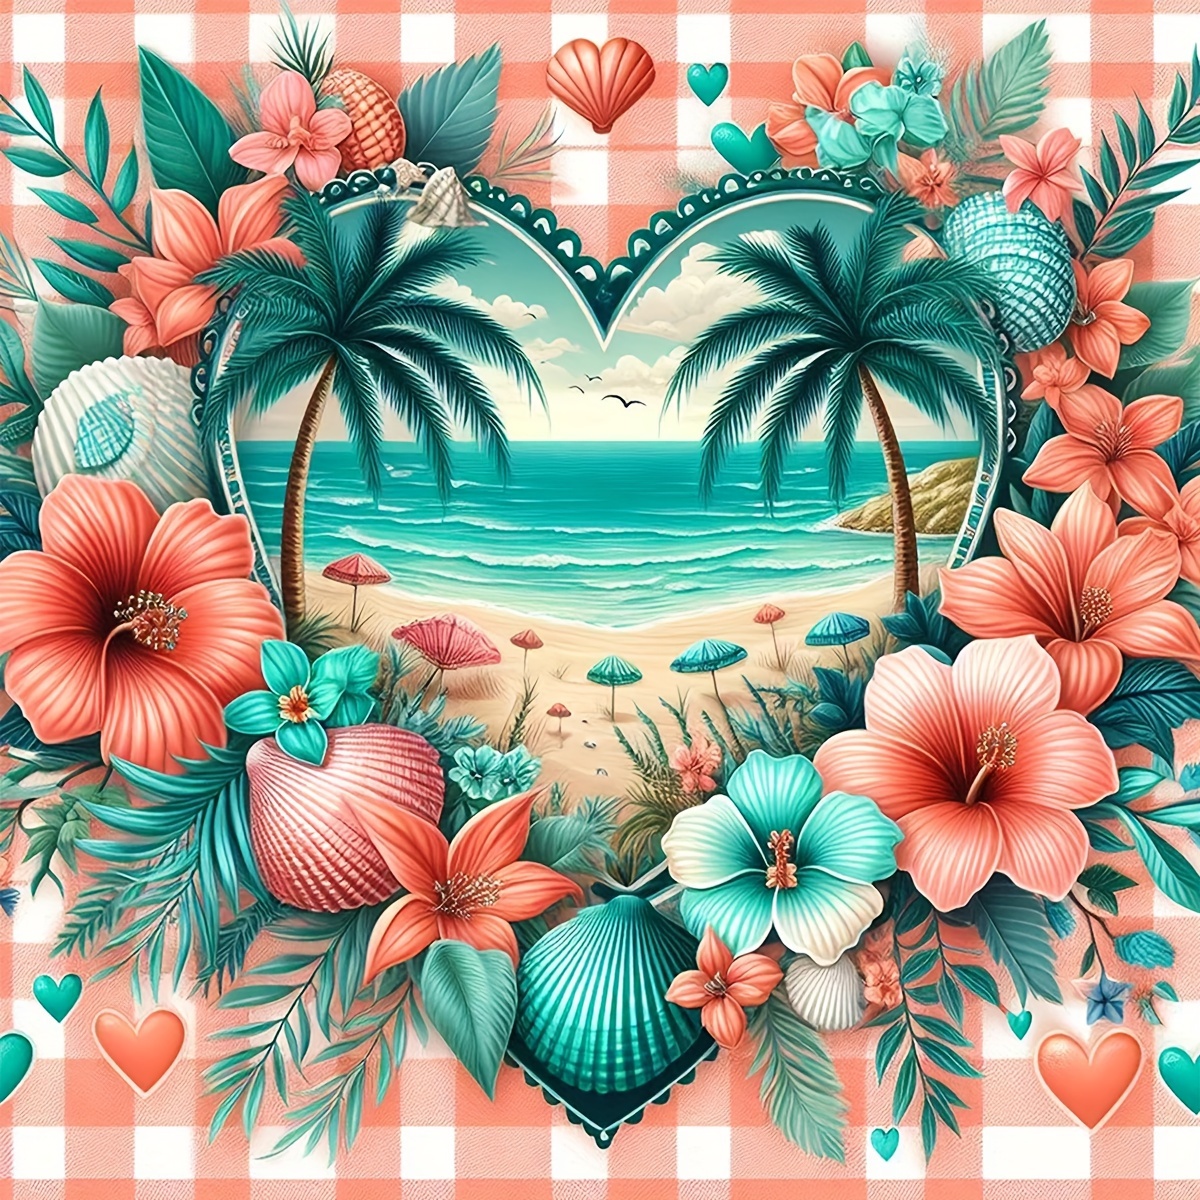 

Tropical Beach Scenery 5d Diy Diamond Painting Kit, 30x30cm Round Acrylic Drill Art, Full Drill Embroidery Cross Stitch Set, Wall Decor Home Accessory, Frameless Unique Gift - 1pc